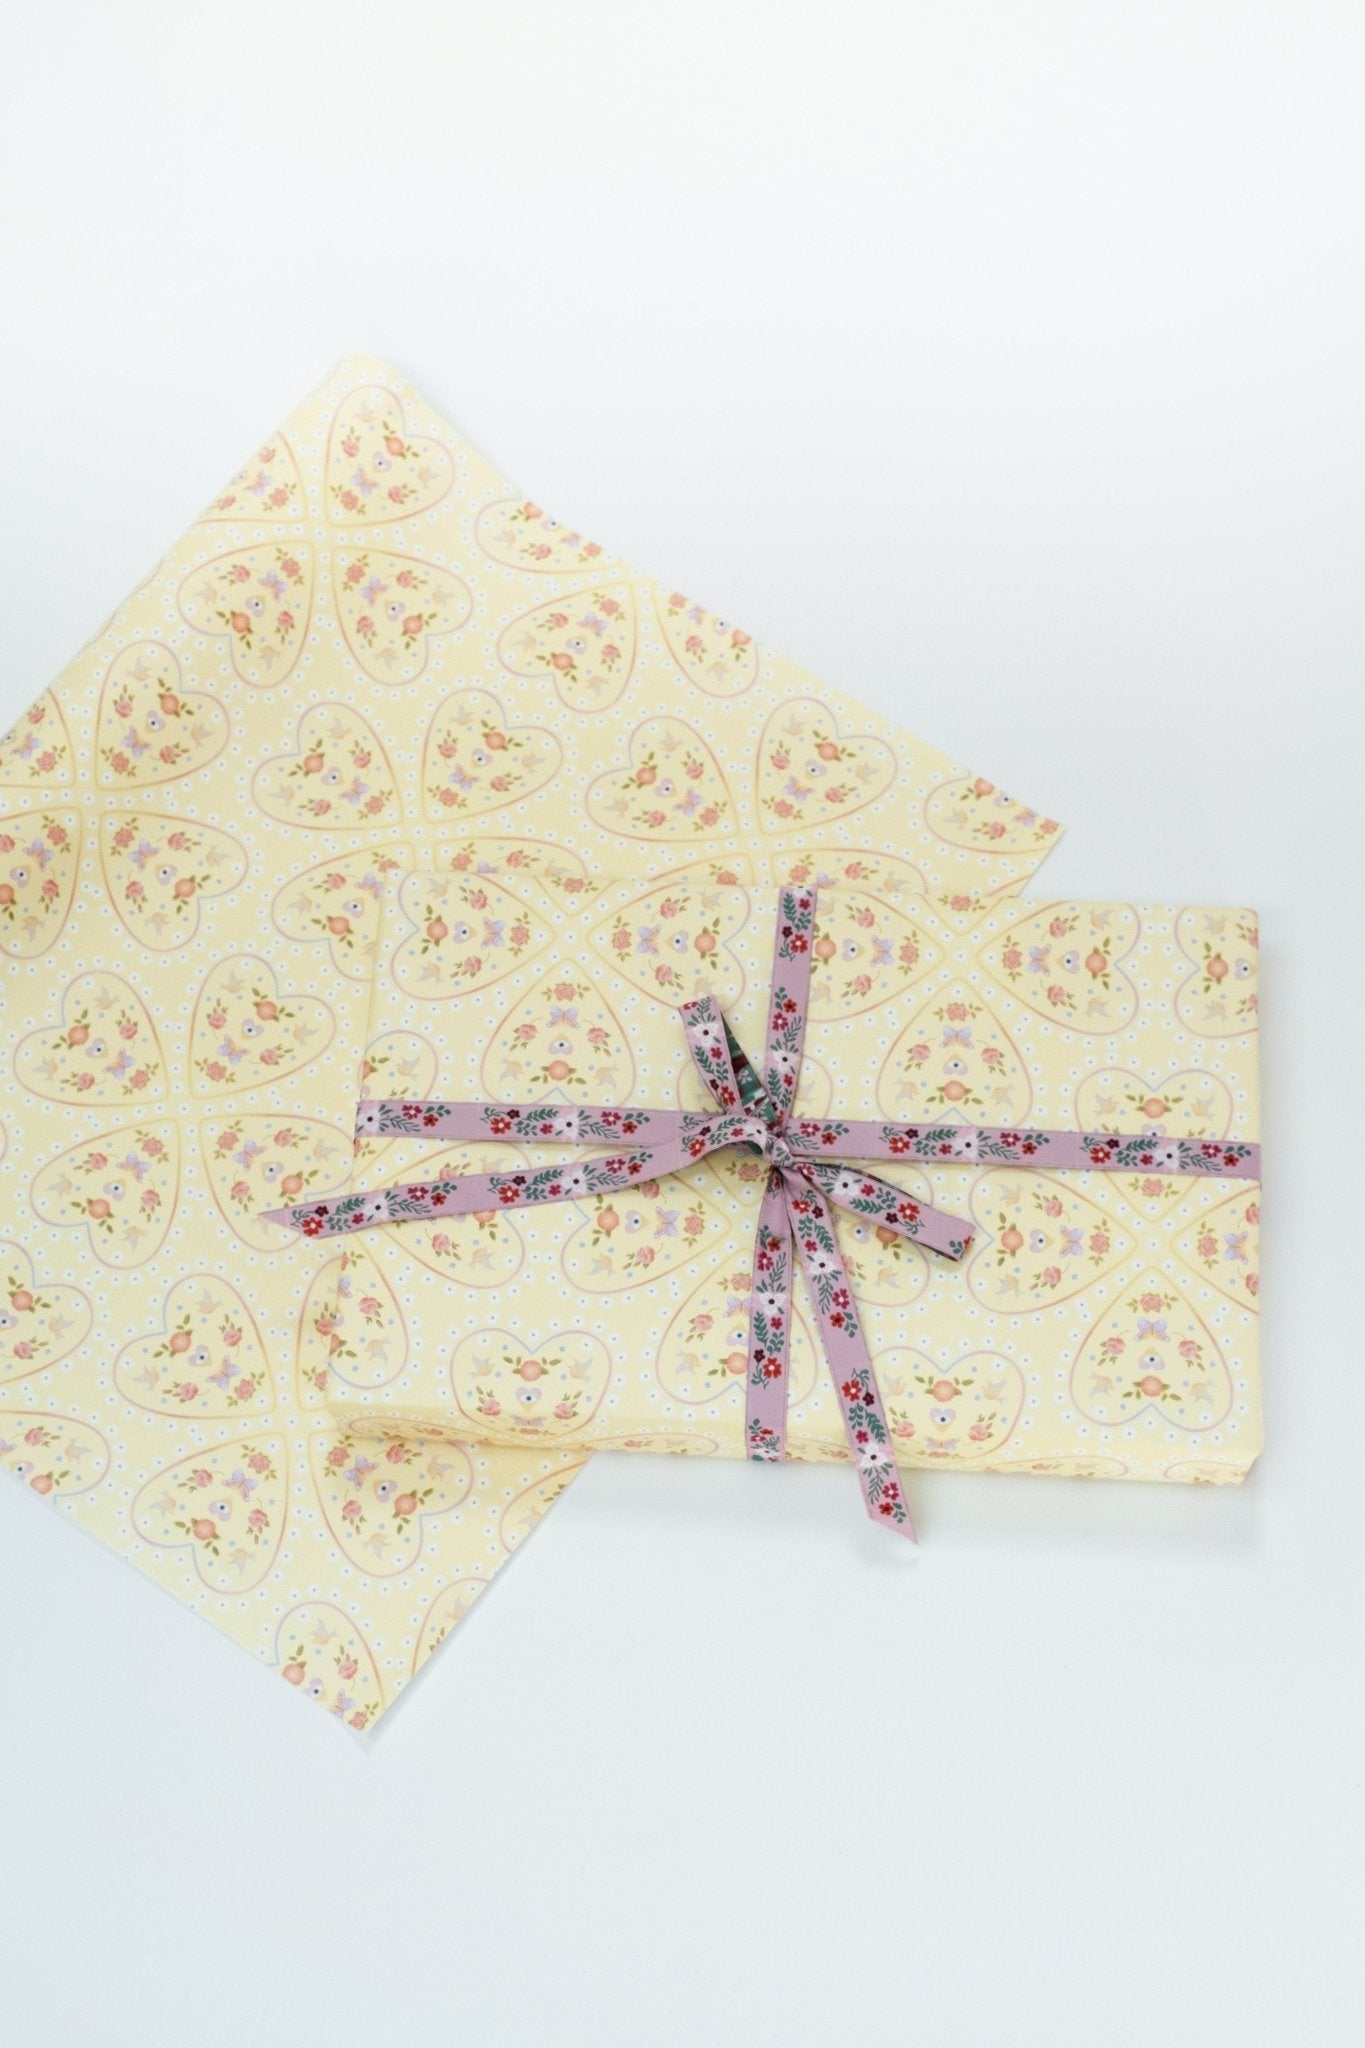 Single sheet of Mirrored Hearts gift wrap. Shown wrapped with purple floral ribbon.